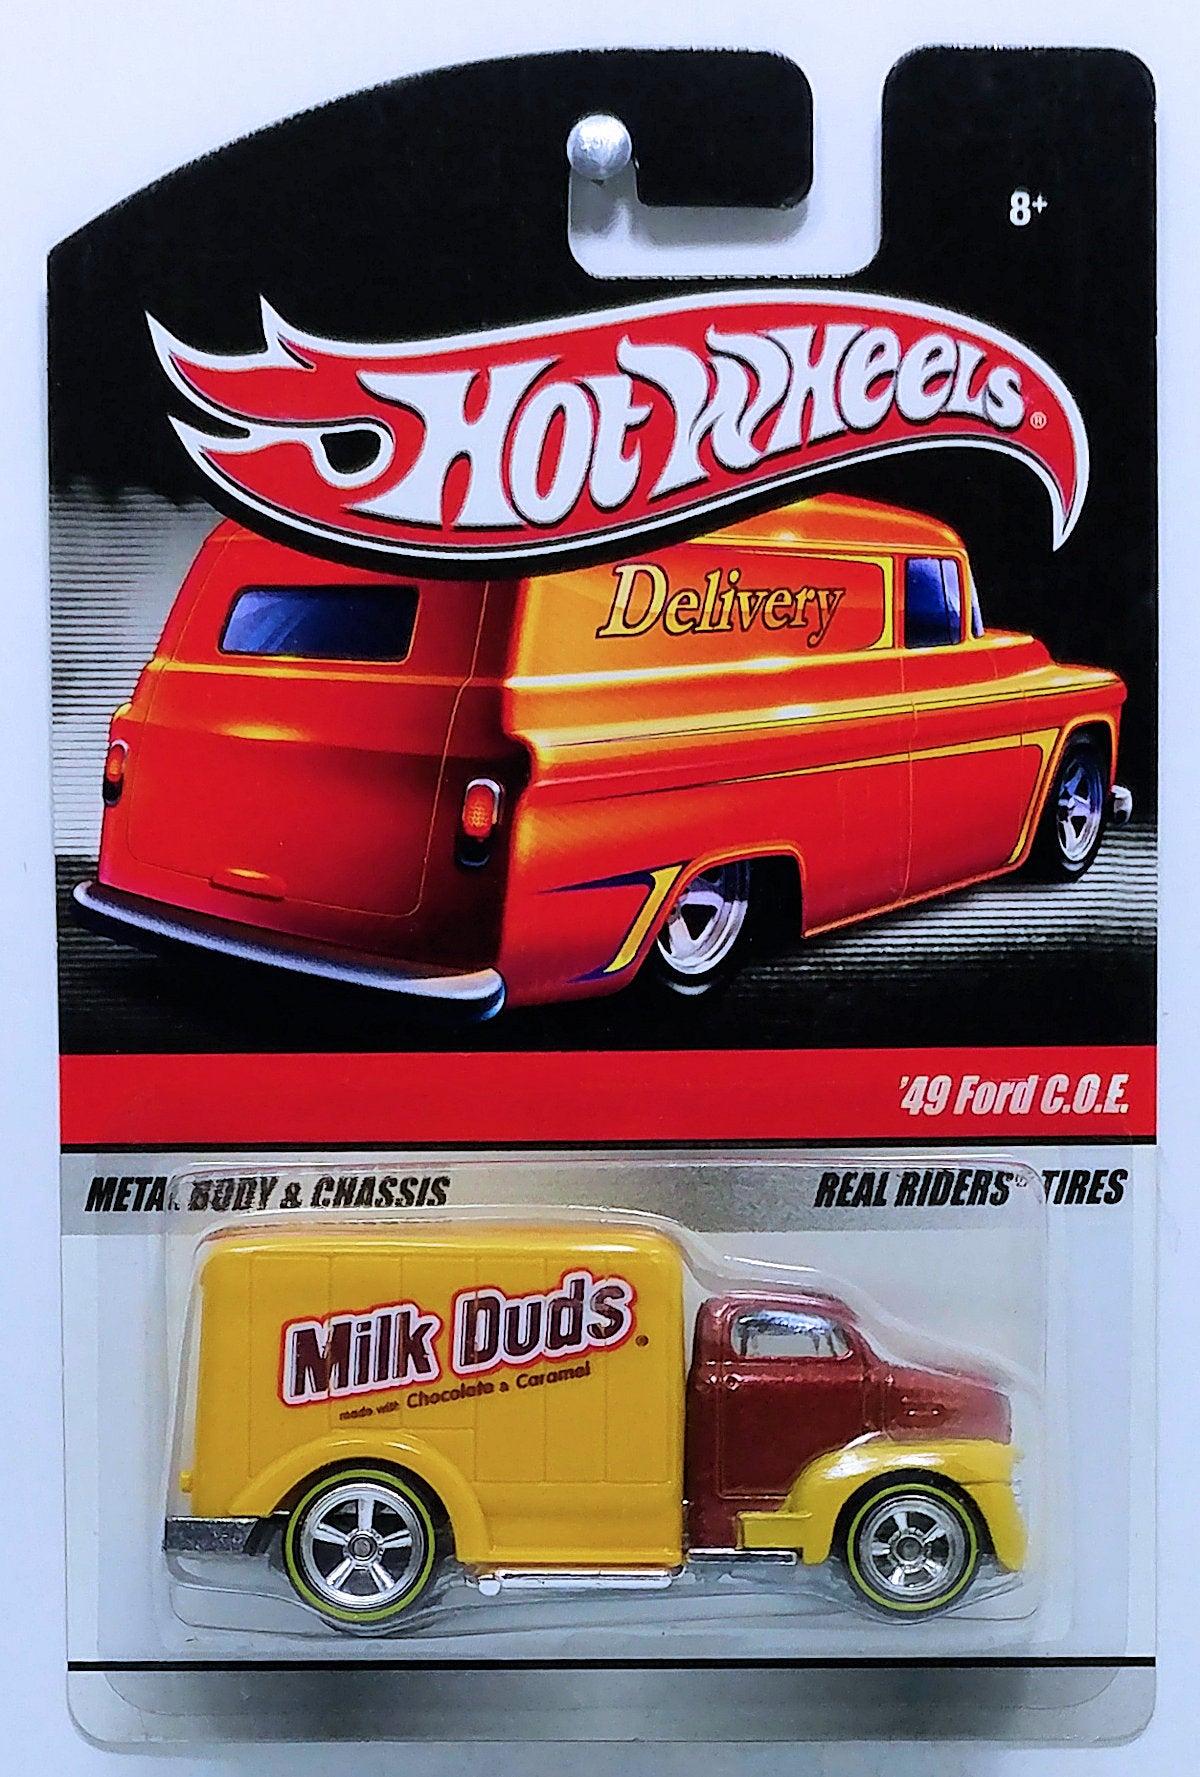 Hot Wheels 2009 - Delivery / Sweet Rides - '49 Ford C.O.E. - Brown & Yellow / Milk Duds - Metal/Metal & Real Riders